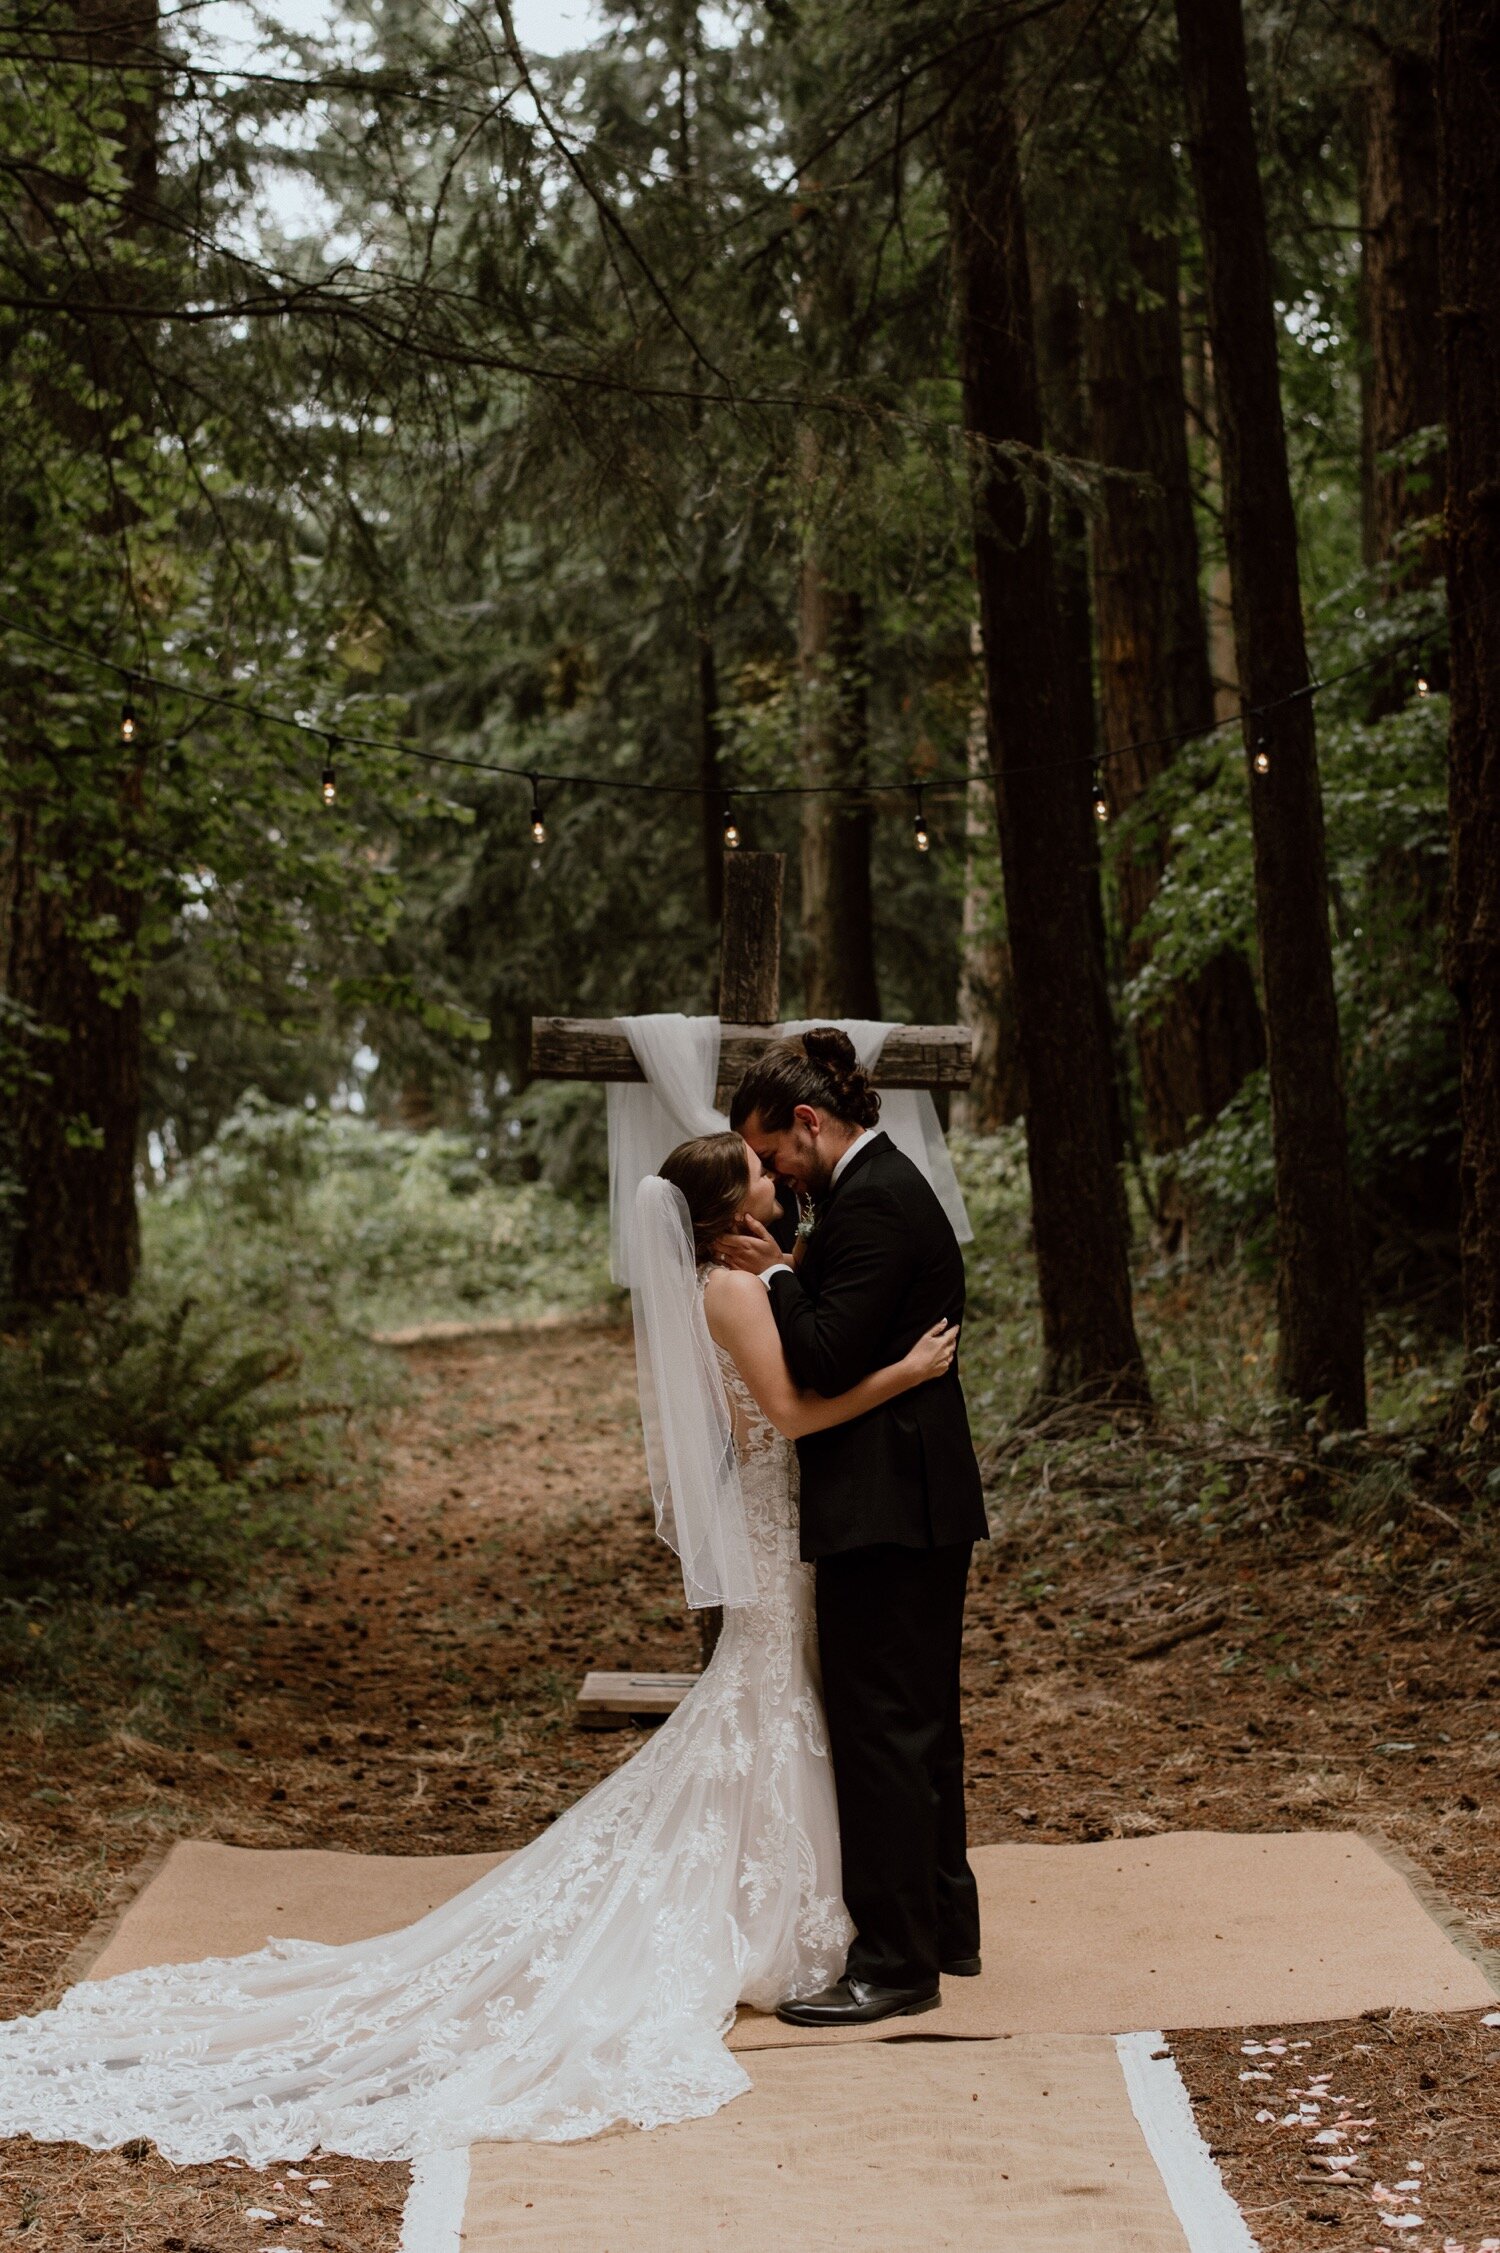 Emma and David's Moody and Romantic Wedding in the Woods | Oregon Wedding Photographer